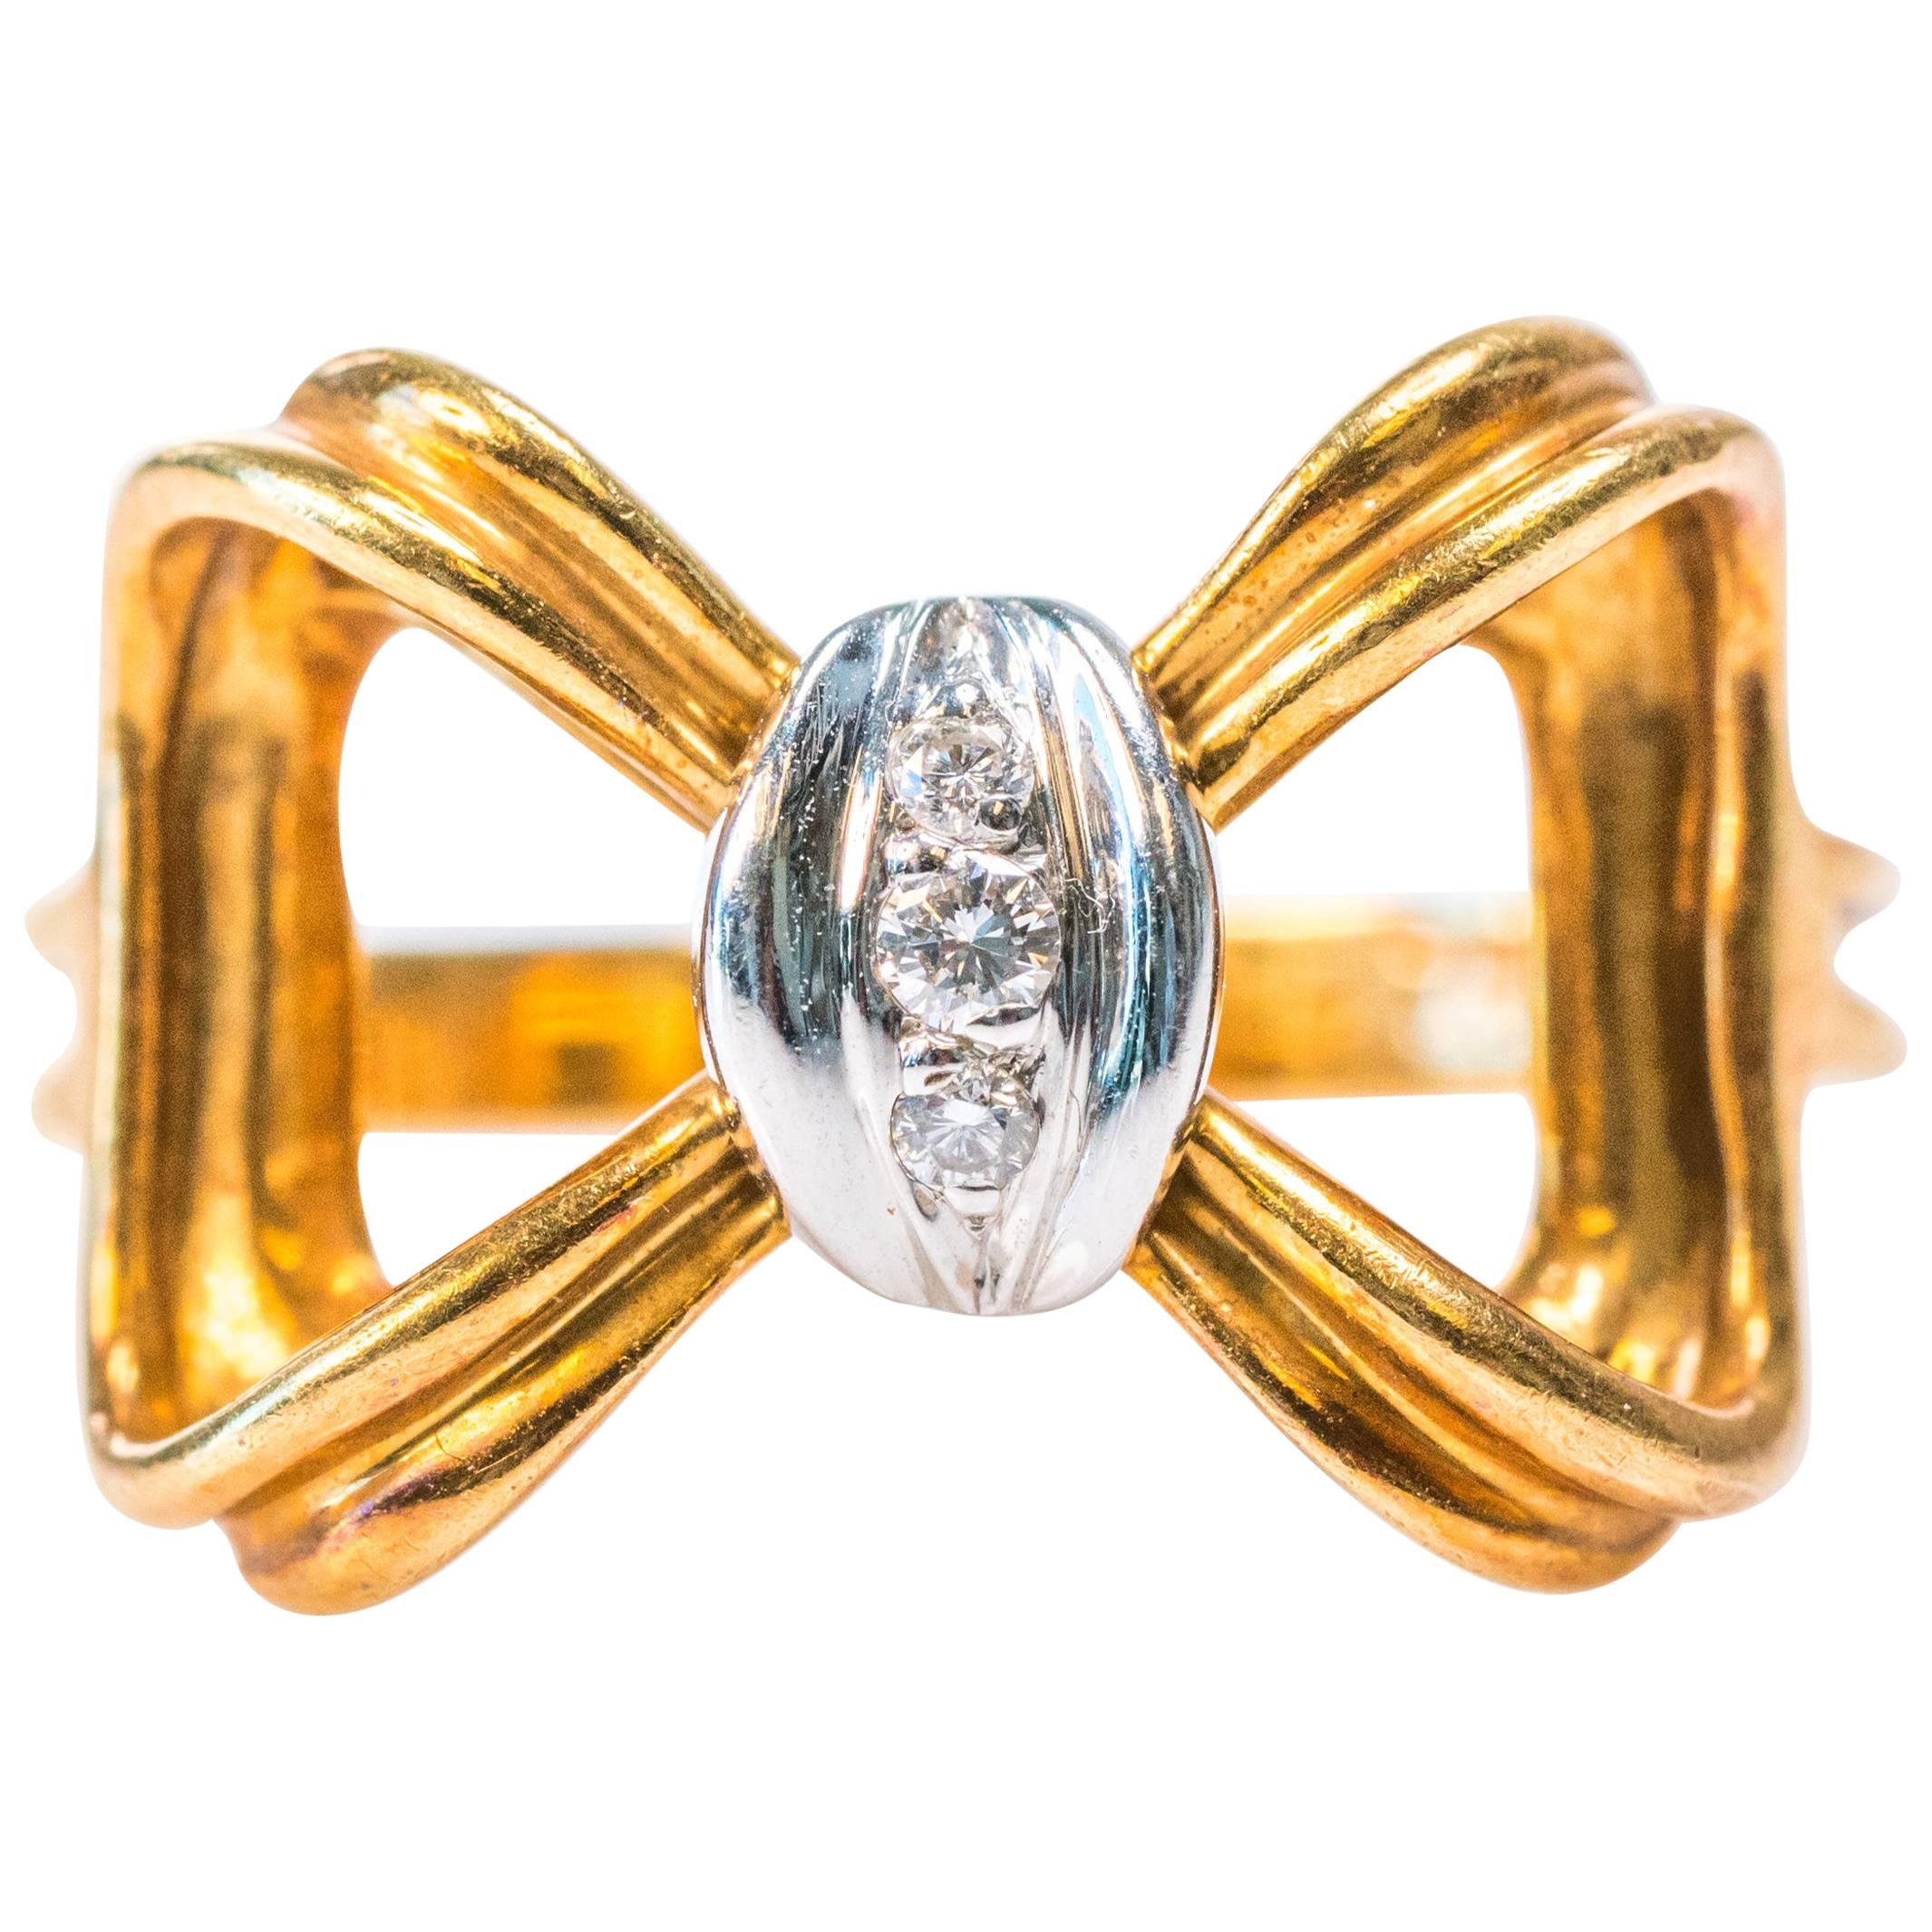 1980s Tiffany & Co. Diamond, Platinum and 18K Gold Bow Ring